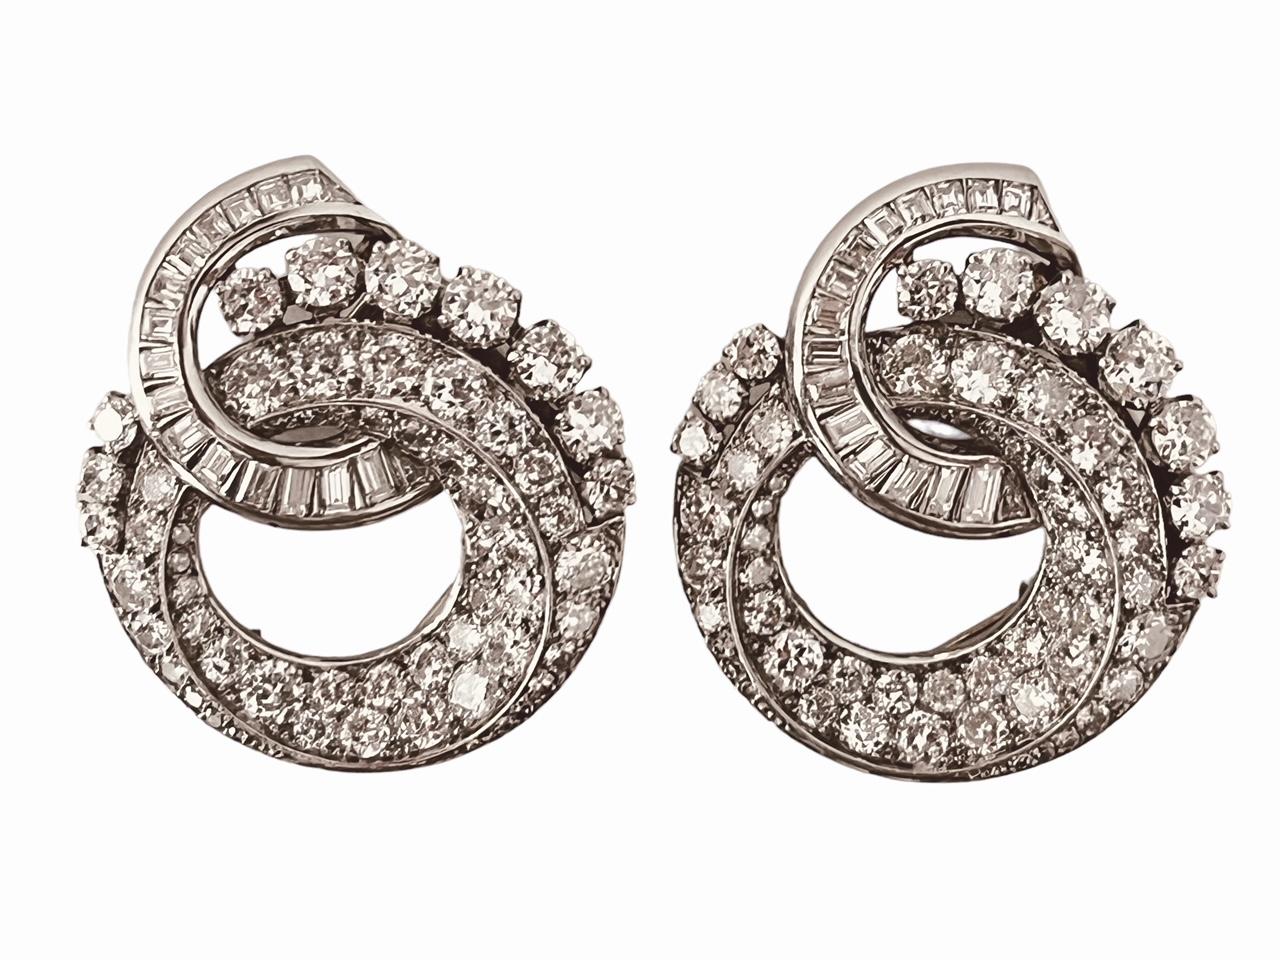 A Pair Of 10 Carats  Diamond Clip Brooches Mounted In Platinum. Circa 1930 For Sale 1